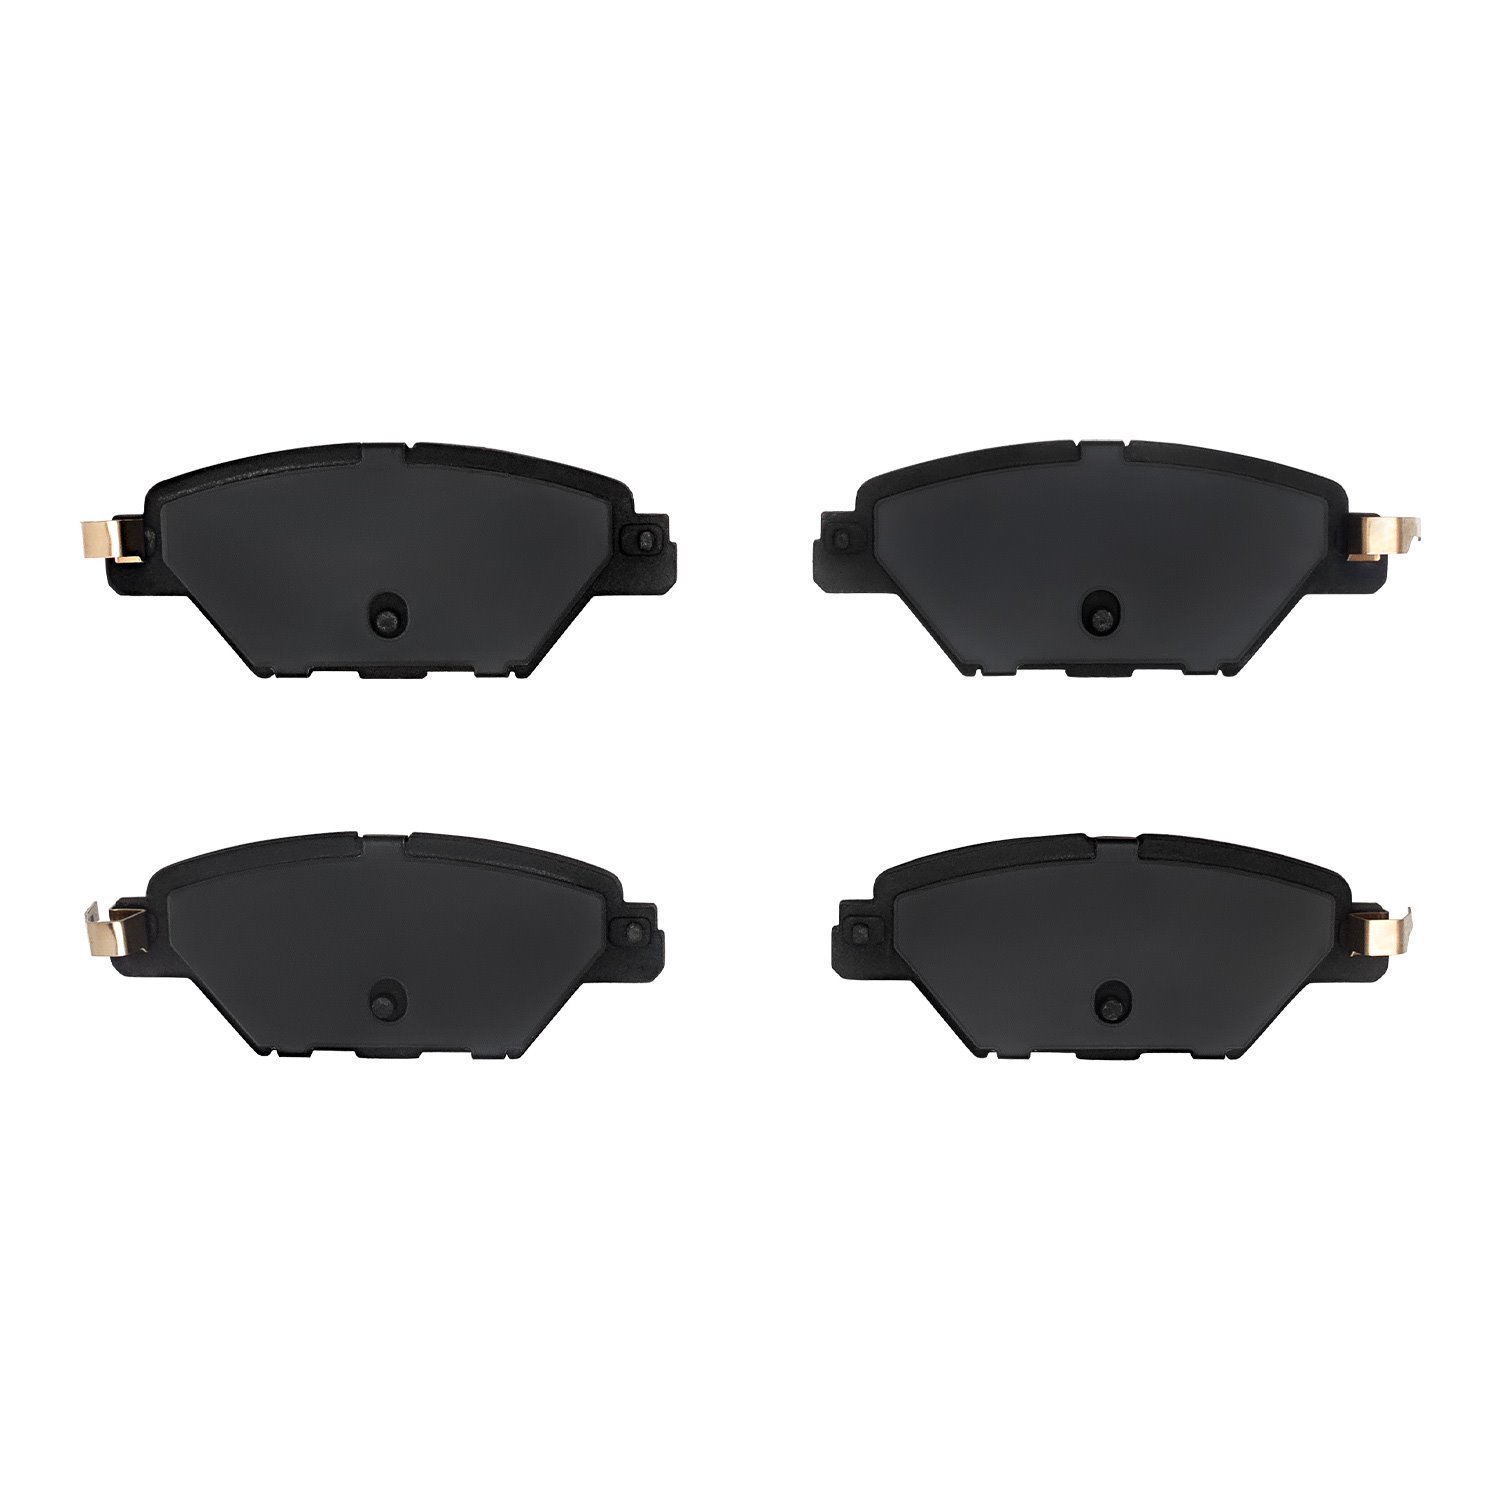 1551-1934-00 5000 Advanced Ceramic Brake Pads, Fits Select Ford/Lincoln/Mercury/Mazda, Position: Rear